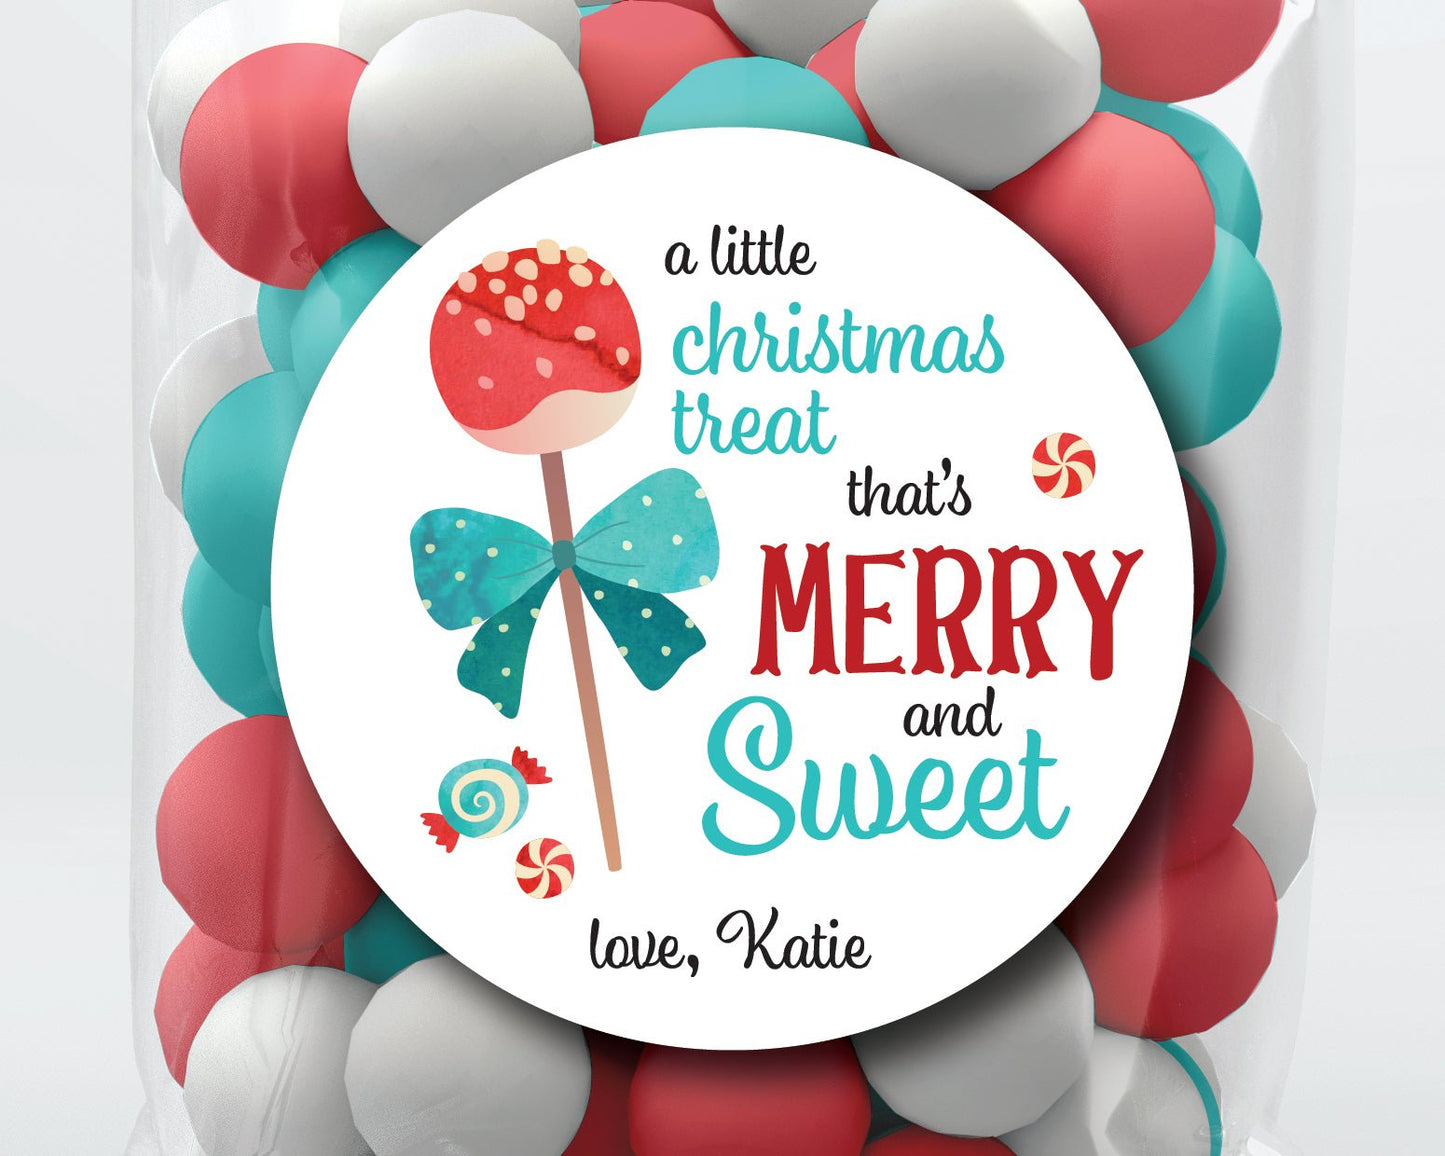 Merry & Sweet, Sweet Christmas Cake Pop Stickers or Tags . Christmas Gift Labels - Scrap Bits